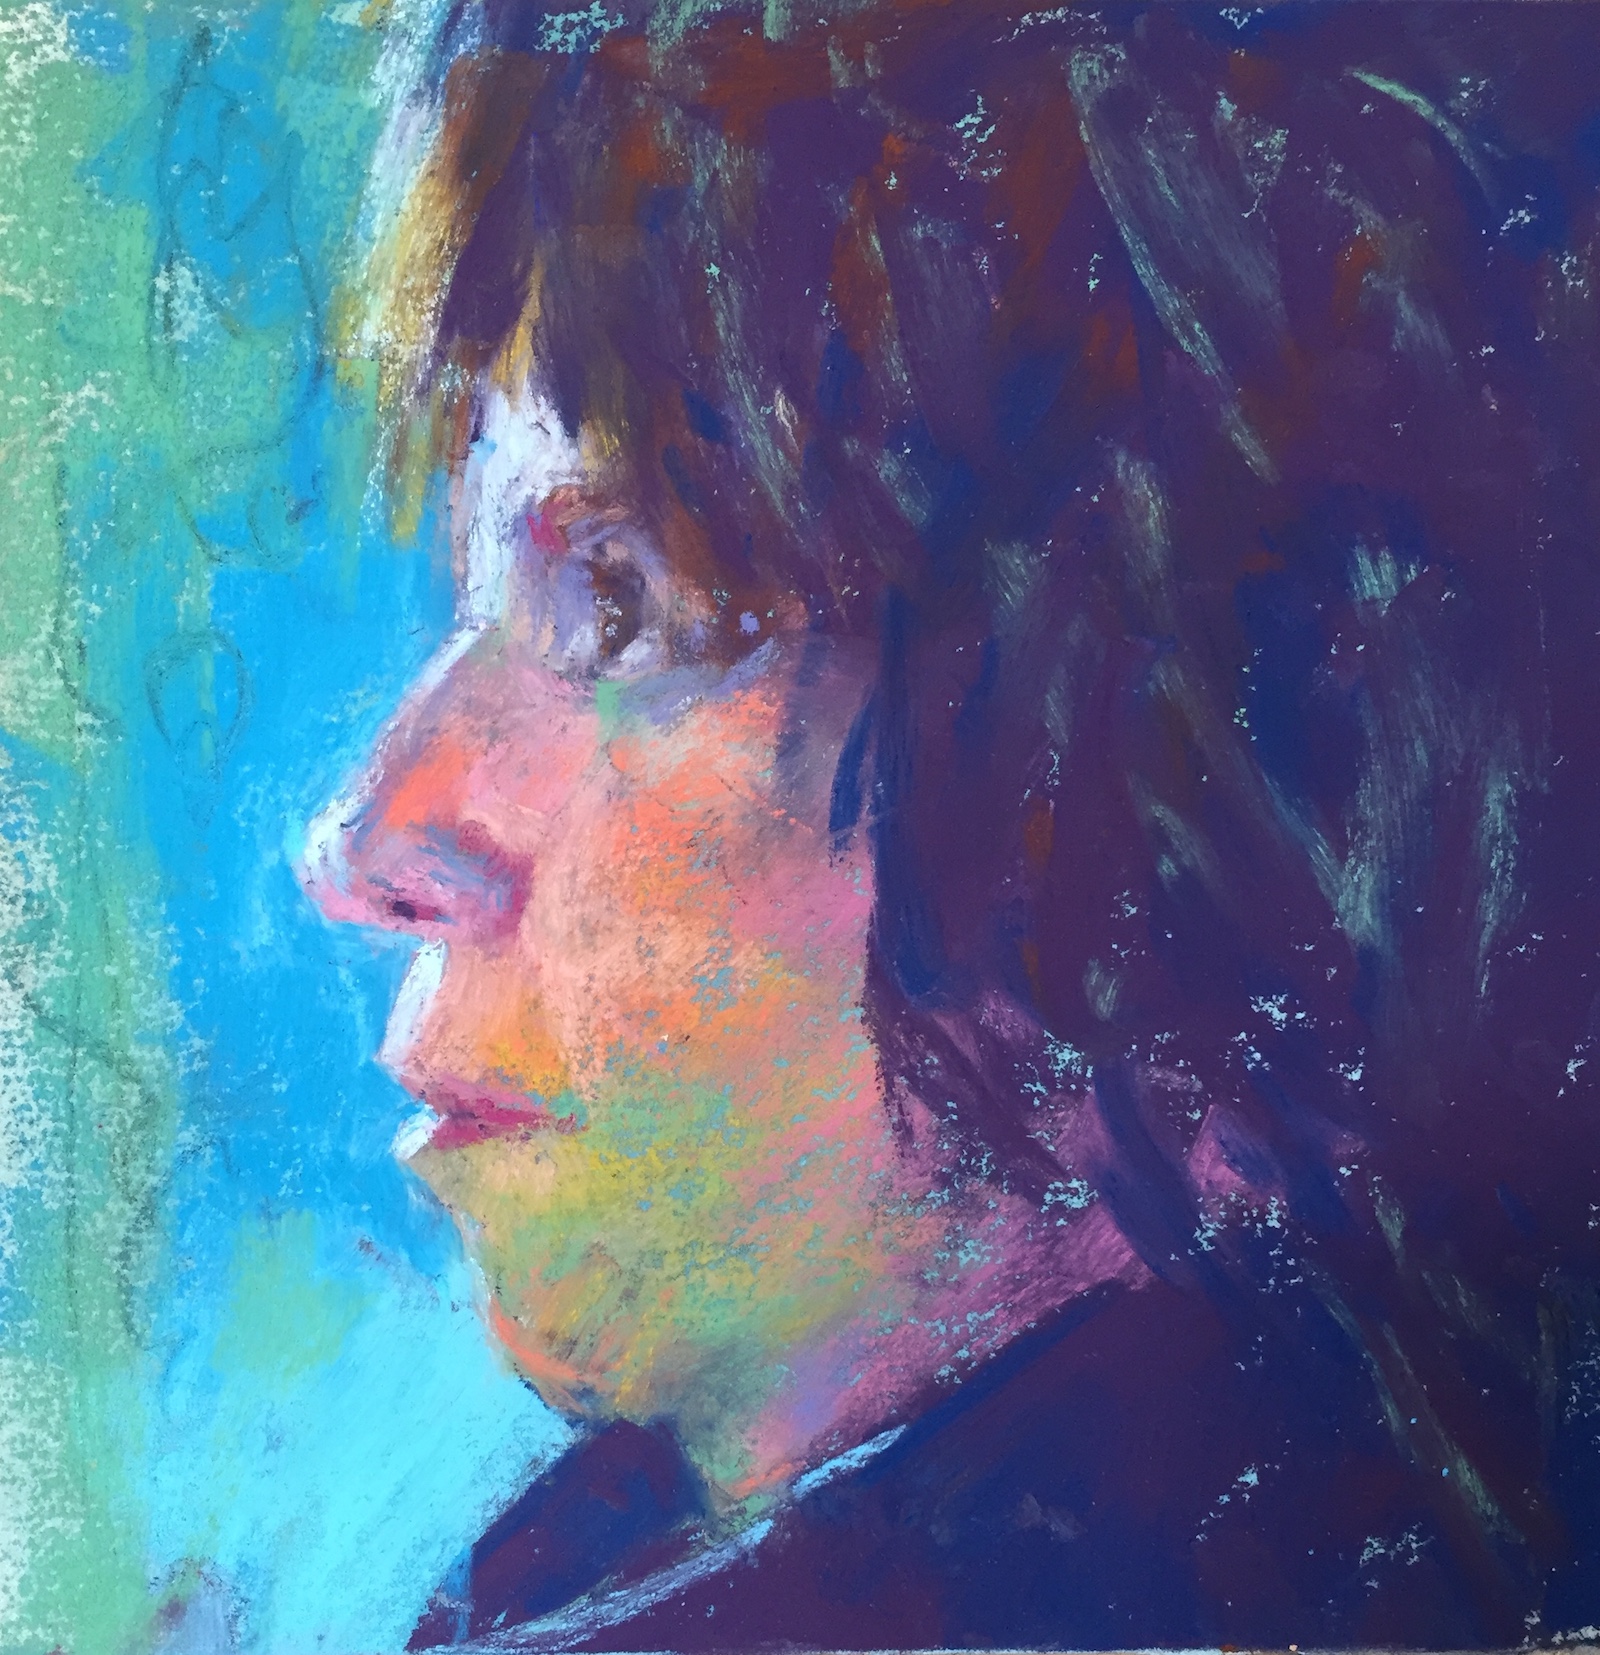 Do something, anything! Decided to add some lighter strokes in the hair. Also changed the lighting on the cheek. And a few more final touches here and there. About 45 mins? Gail Sibley, "Me in Profile," Unison pastels on UART 240 grade, 6 x 6 in.